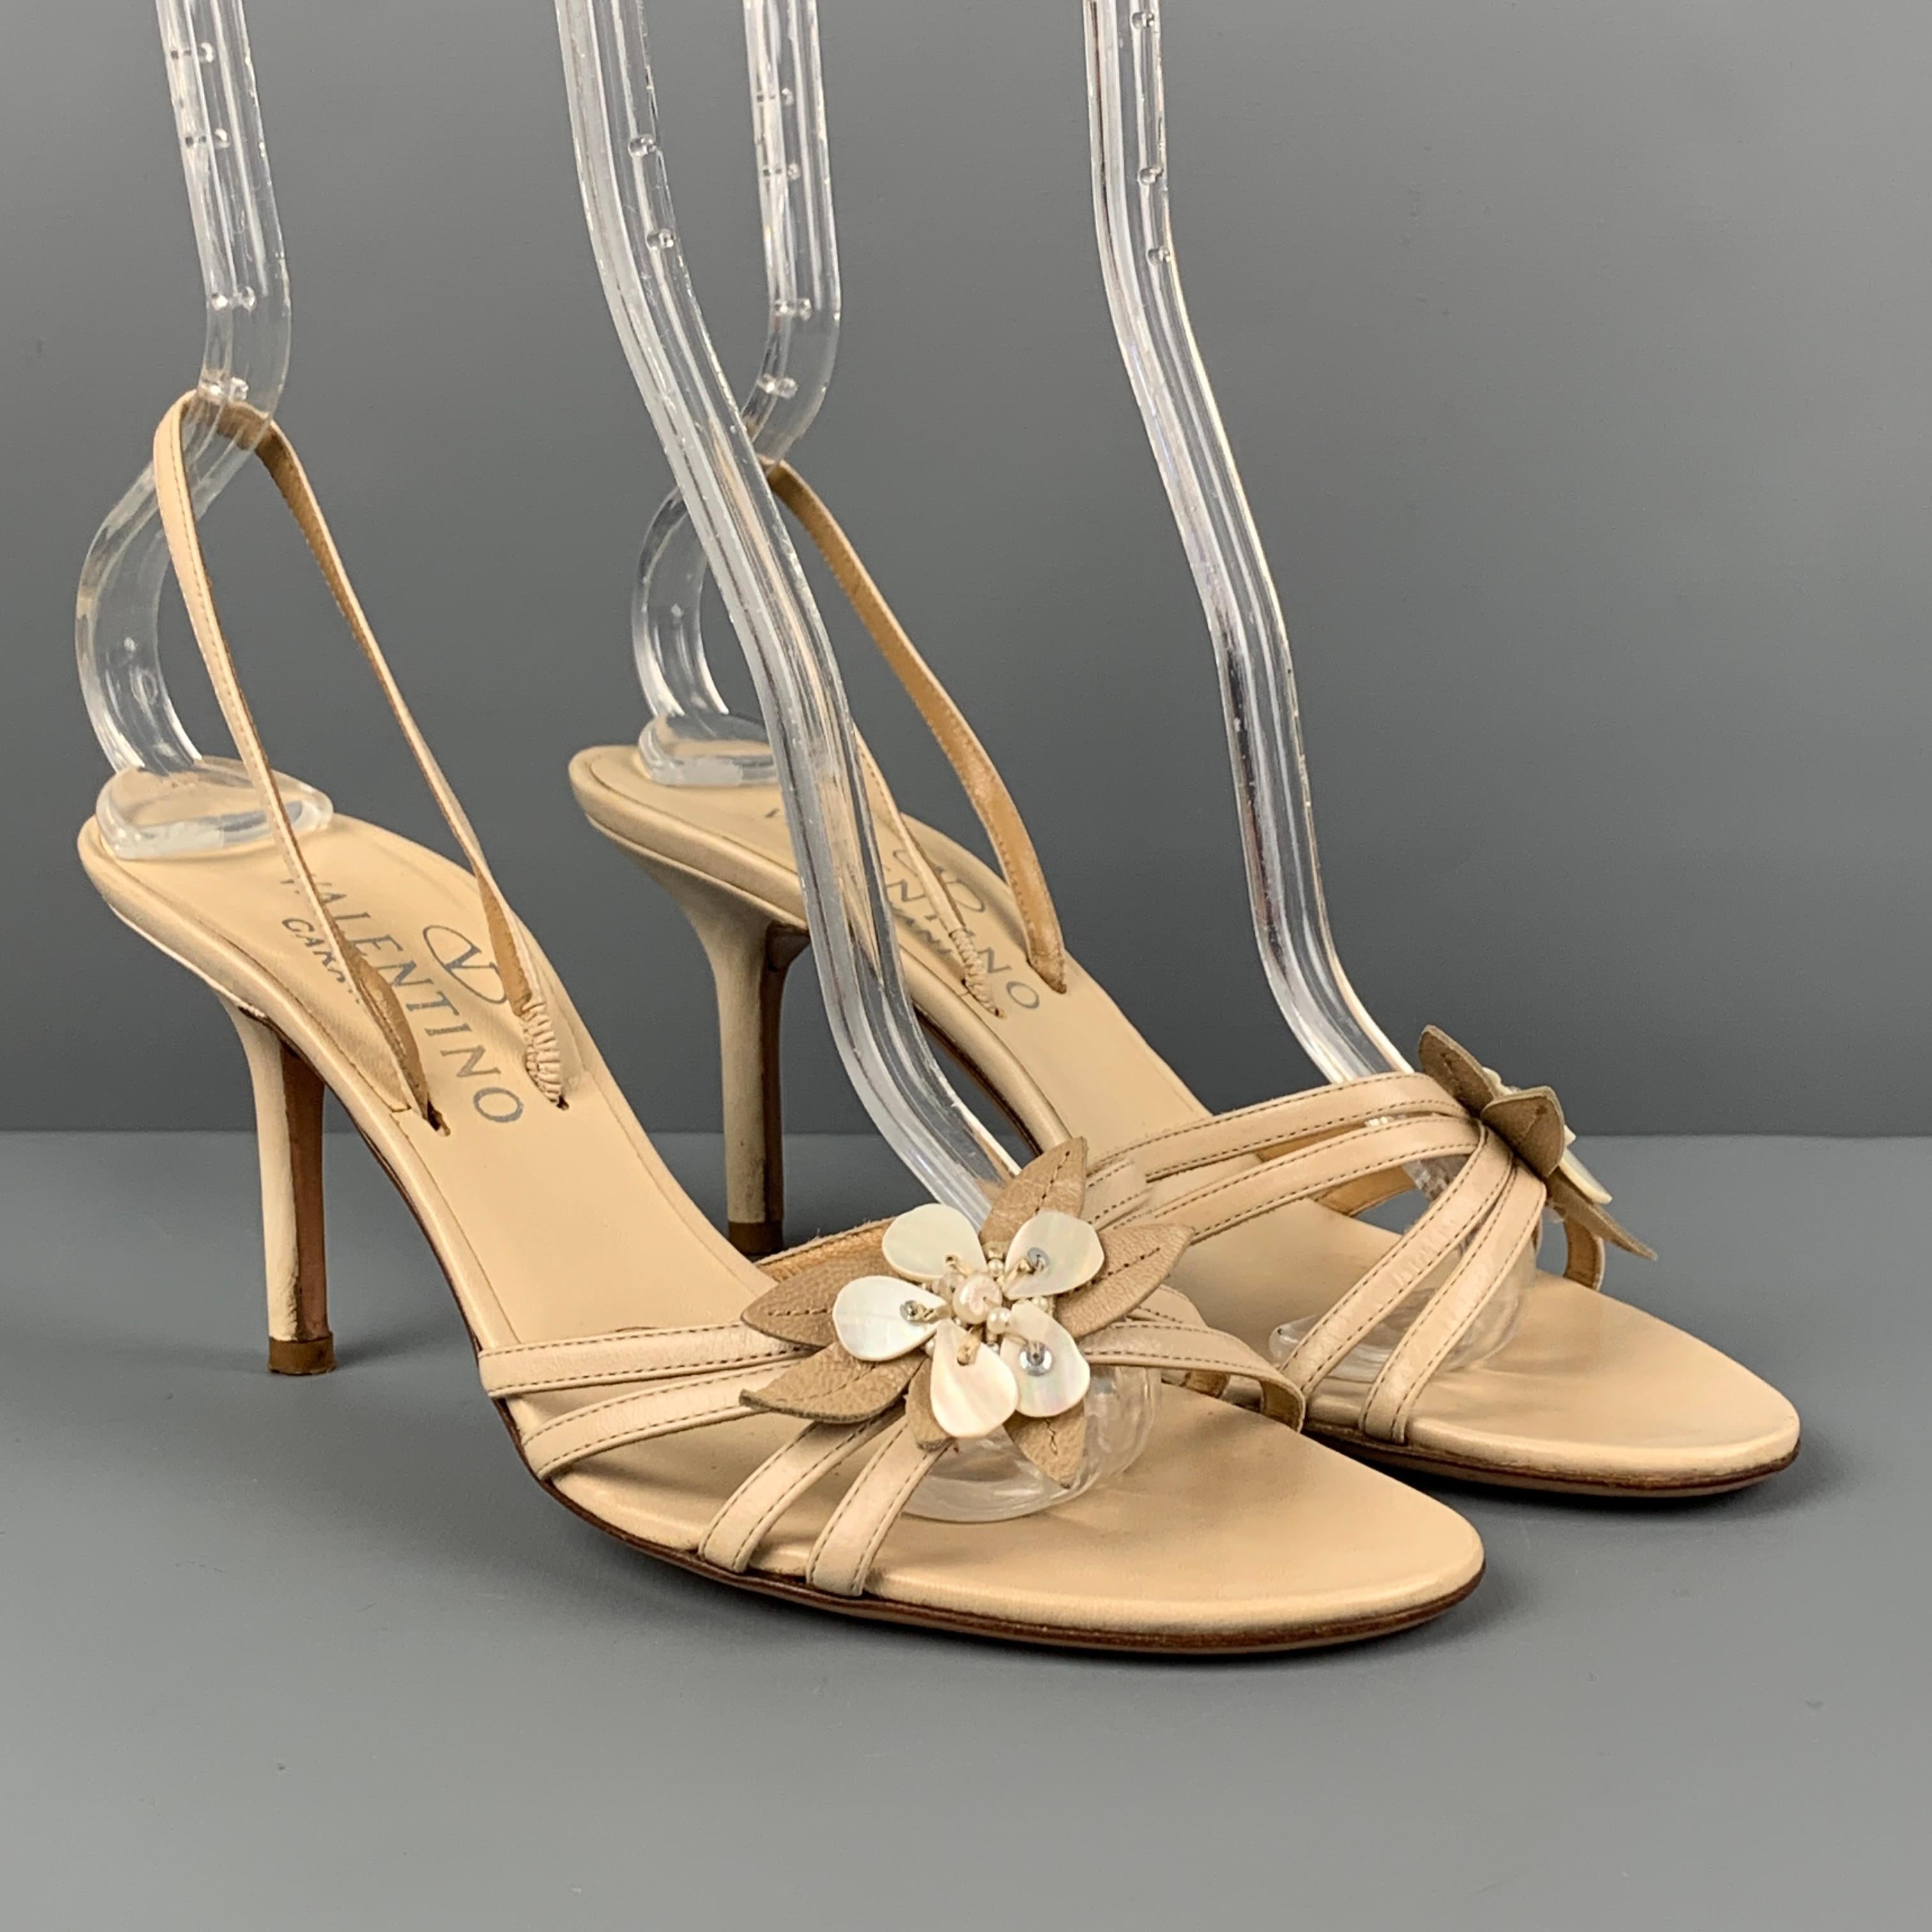 VALENTINO GARAVANI sandals comes in a beige leather featuring a slingback style, open toe, flower applique detail, and a stiletto heel. Made in Italy.

Very Good Pre-Owned Condition.
Marked: 37

Measurements:

Heel: 3 in. 